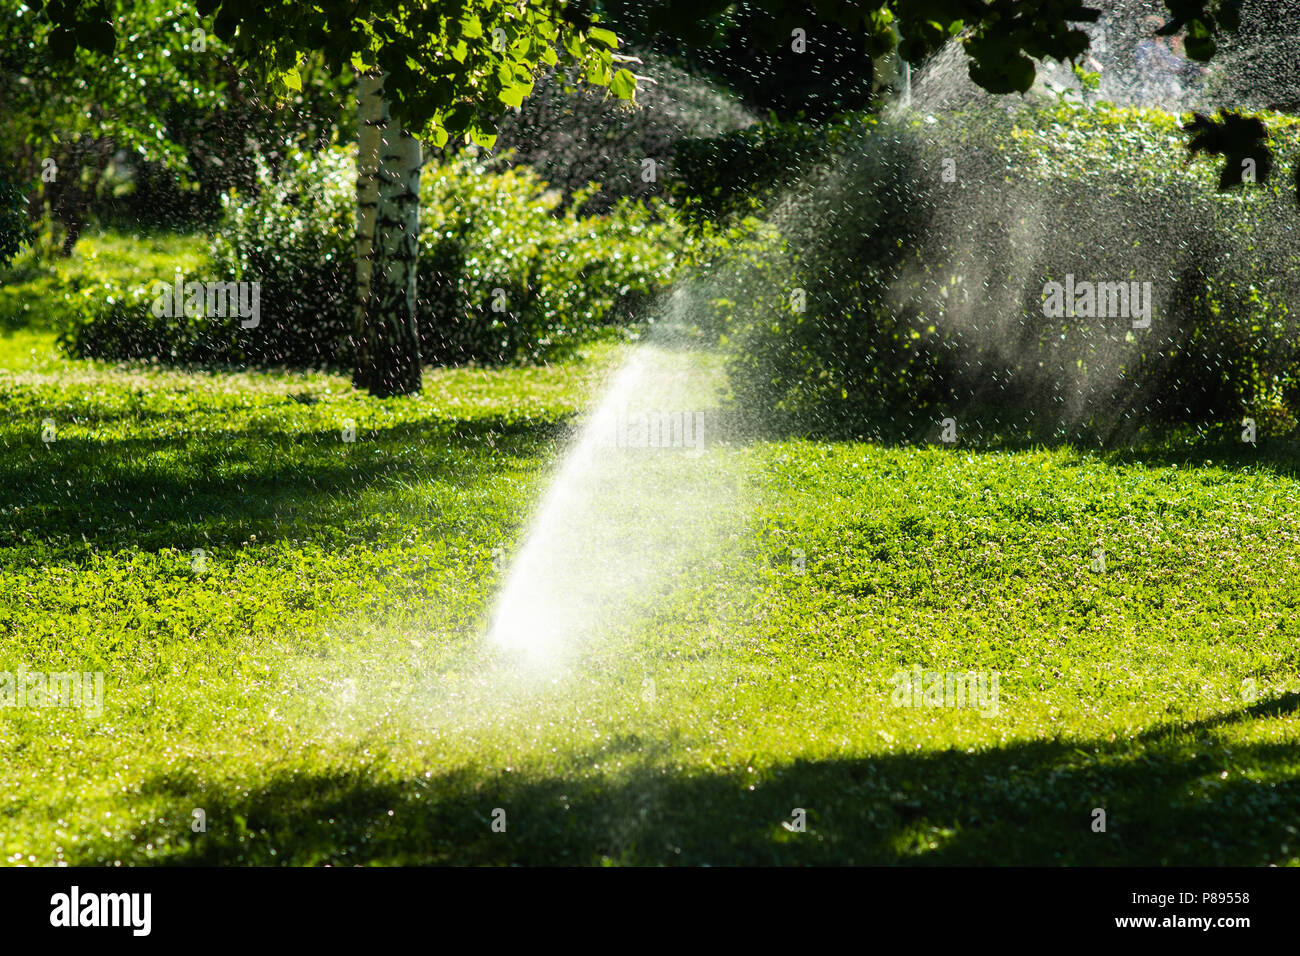 Automatic Watering Sprinkler System Works In The Garden On A Hot